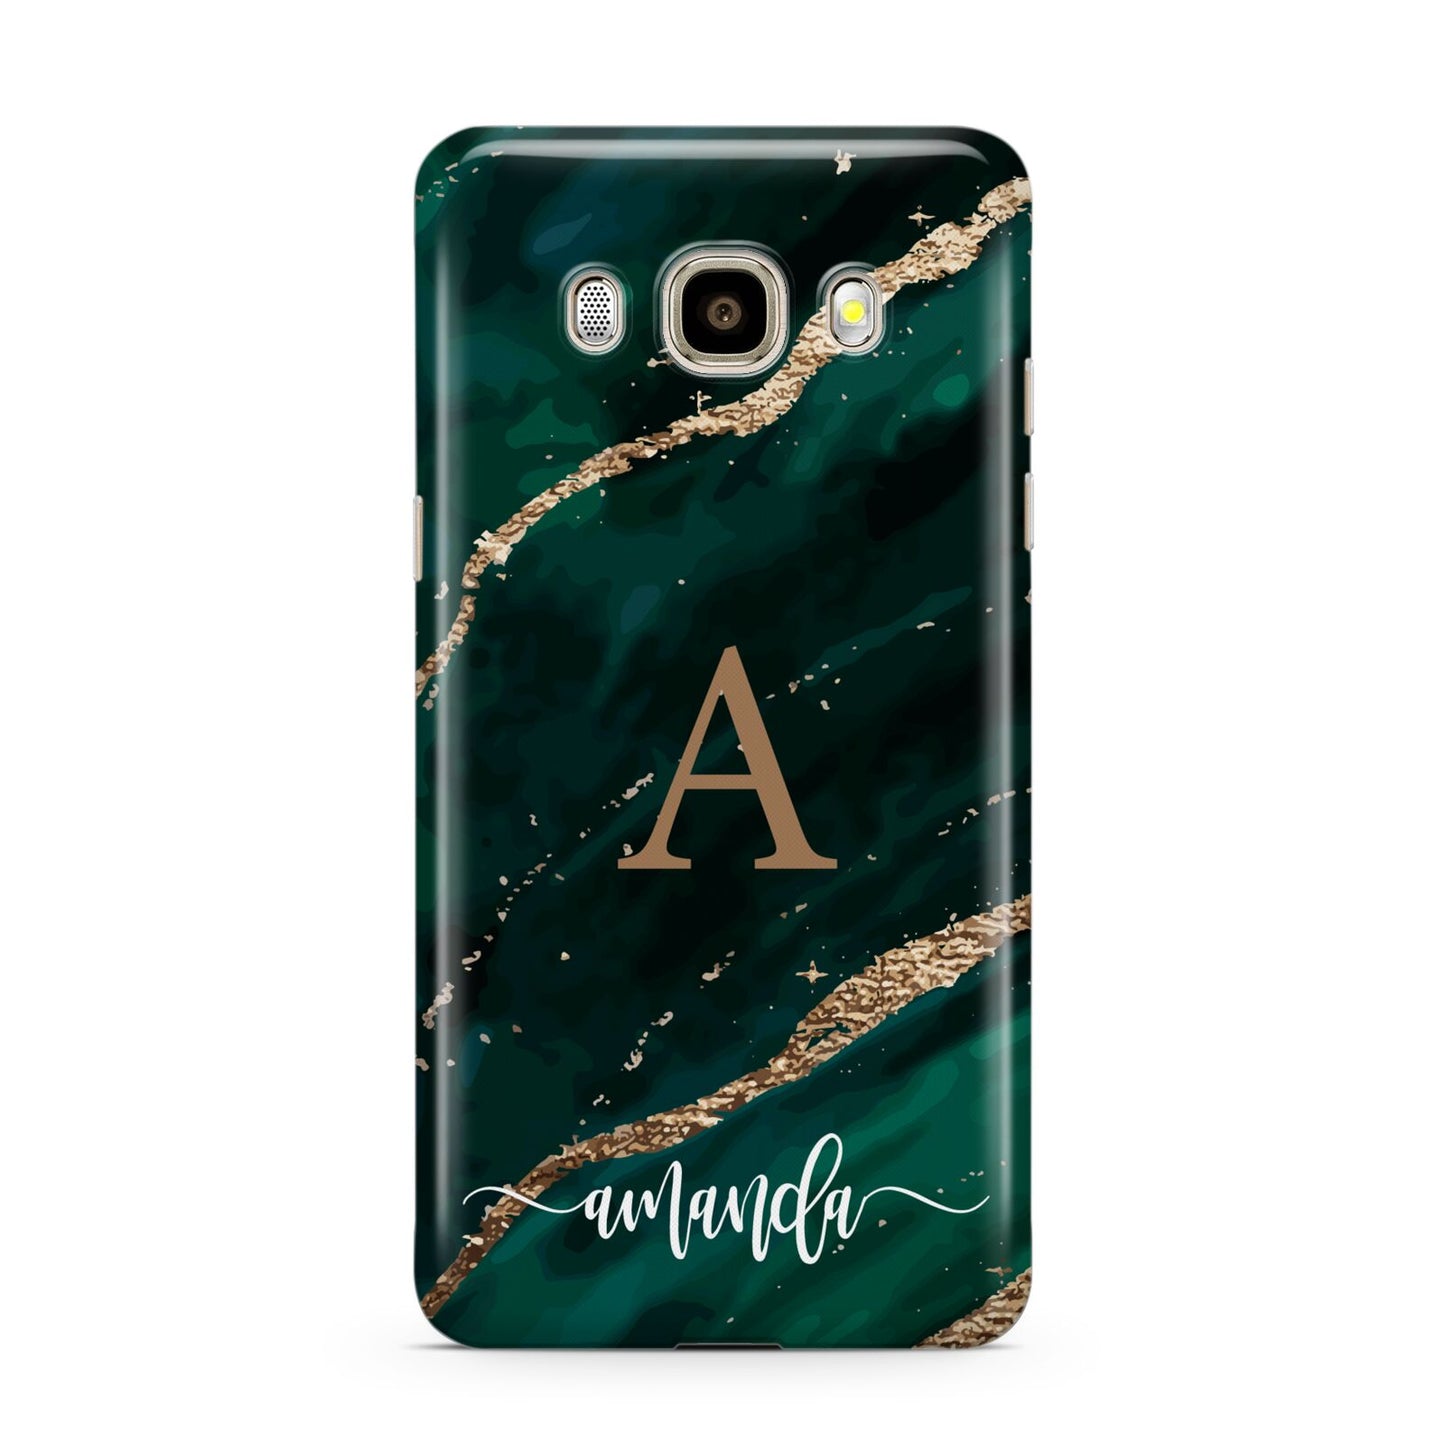 Green Marble Samsung Galaxy J7 2016 Case on gold phone